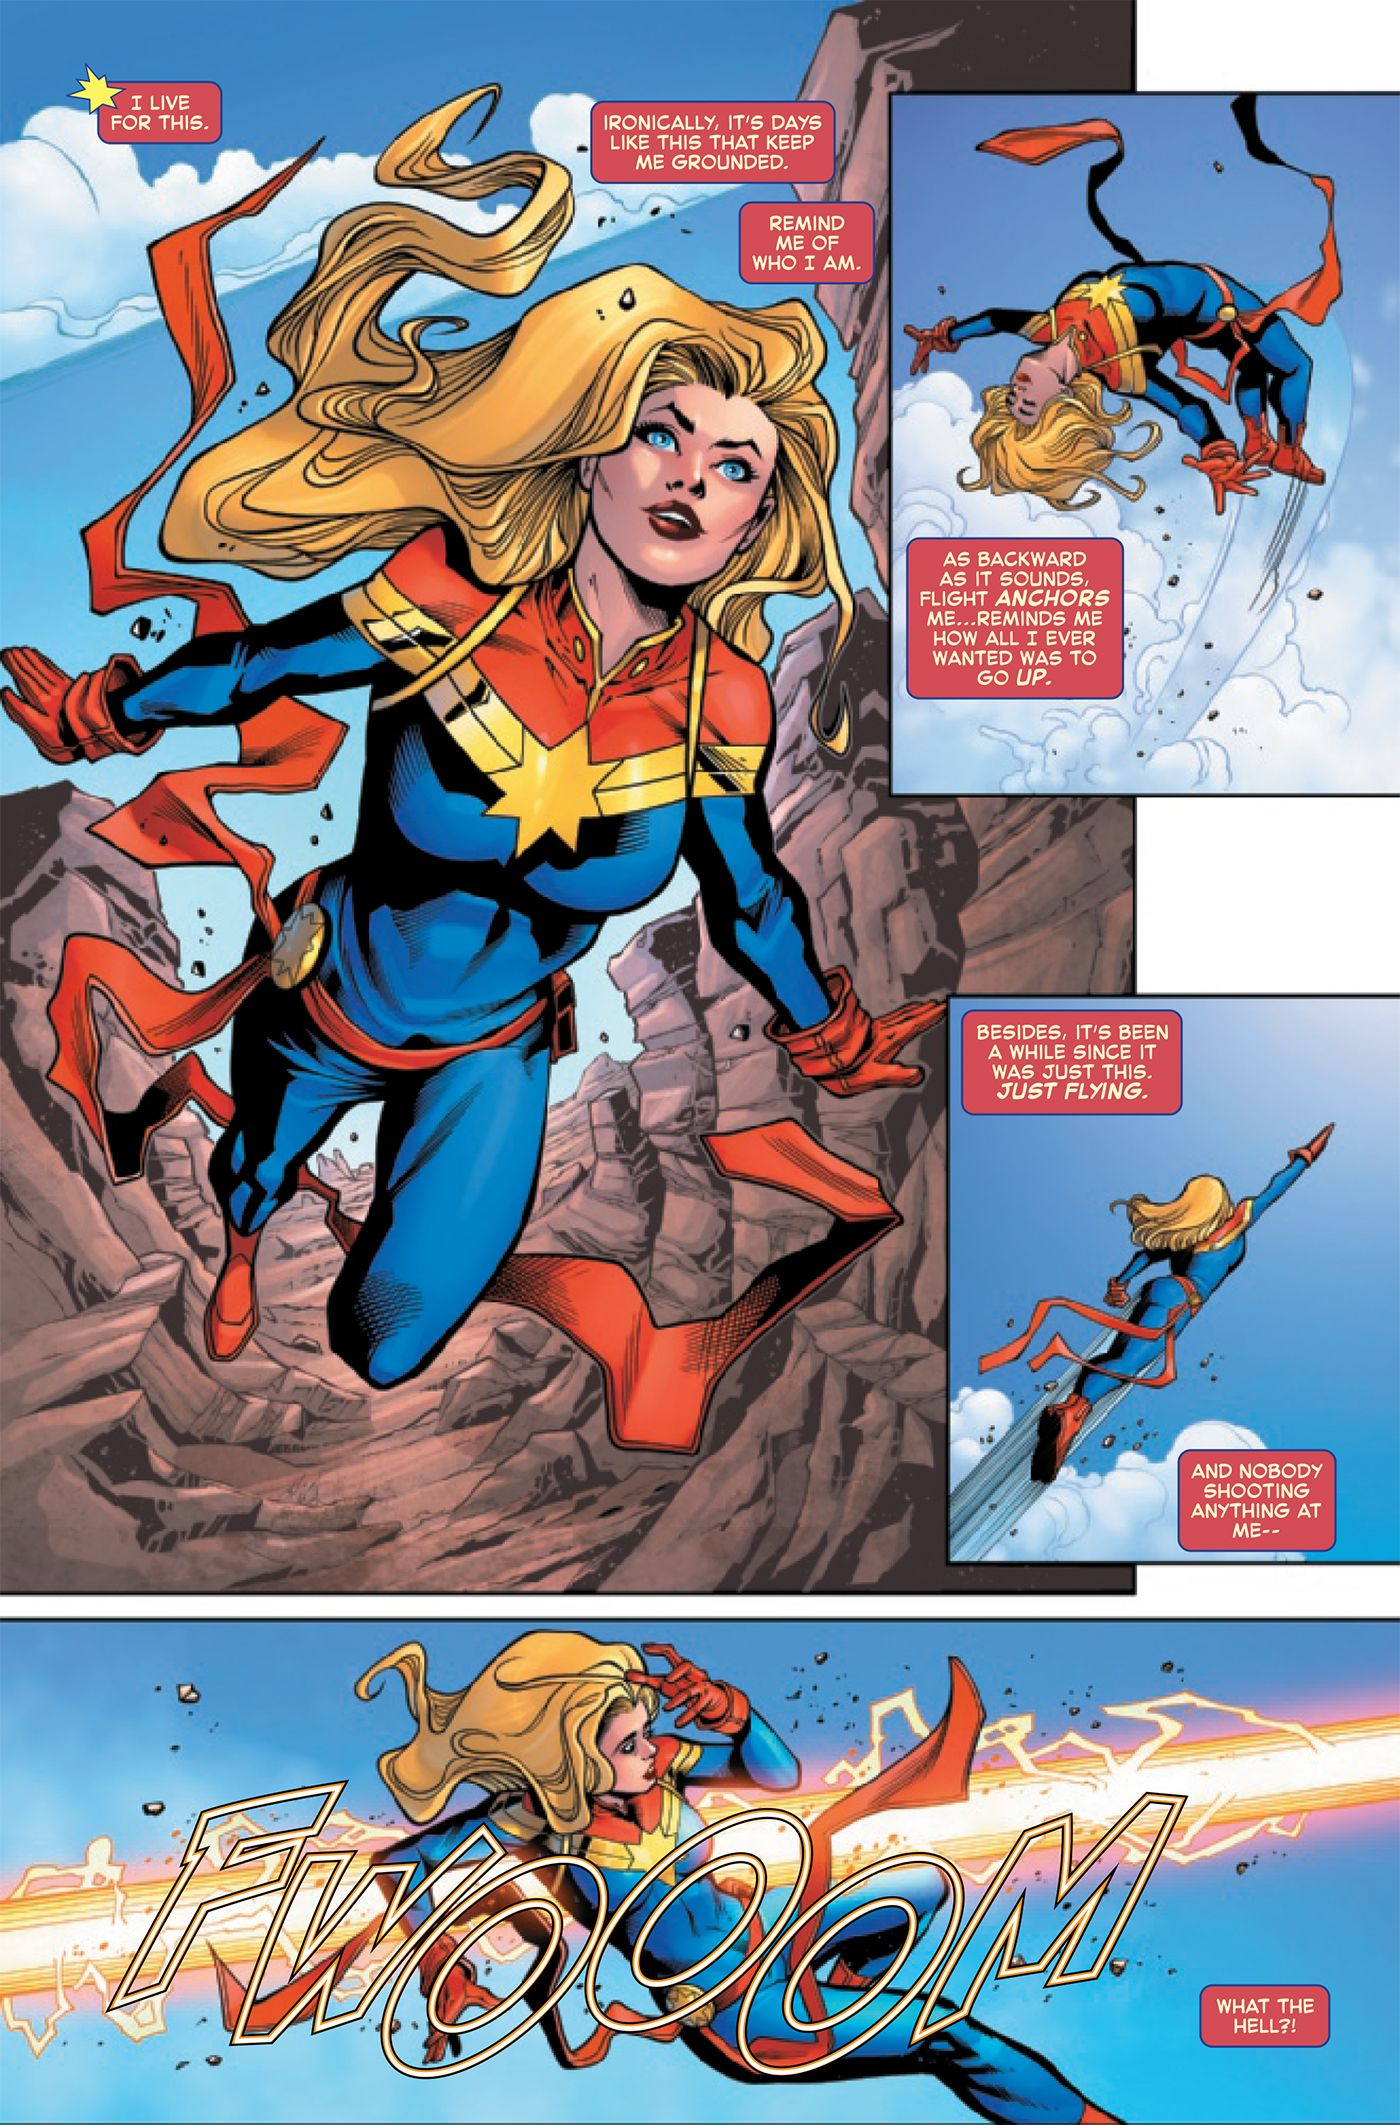 Captain Marvel flies through the sky before getting shot at.